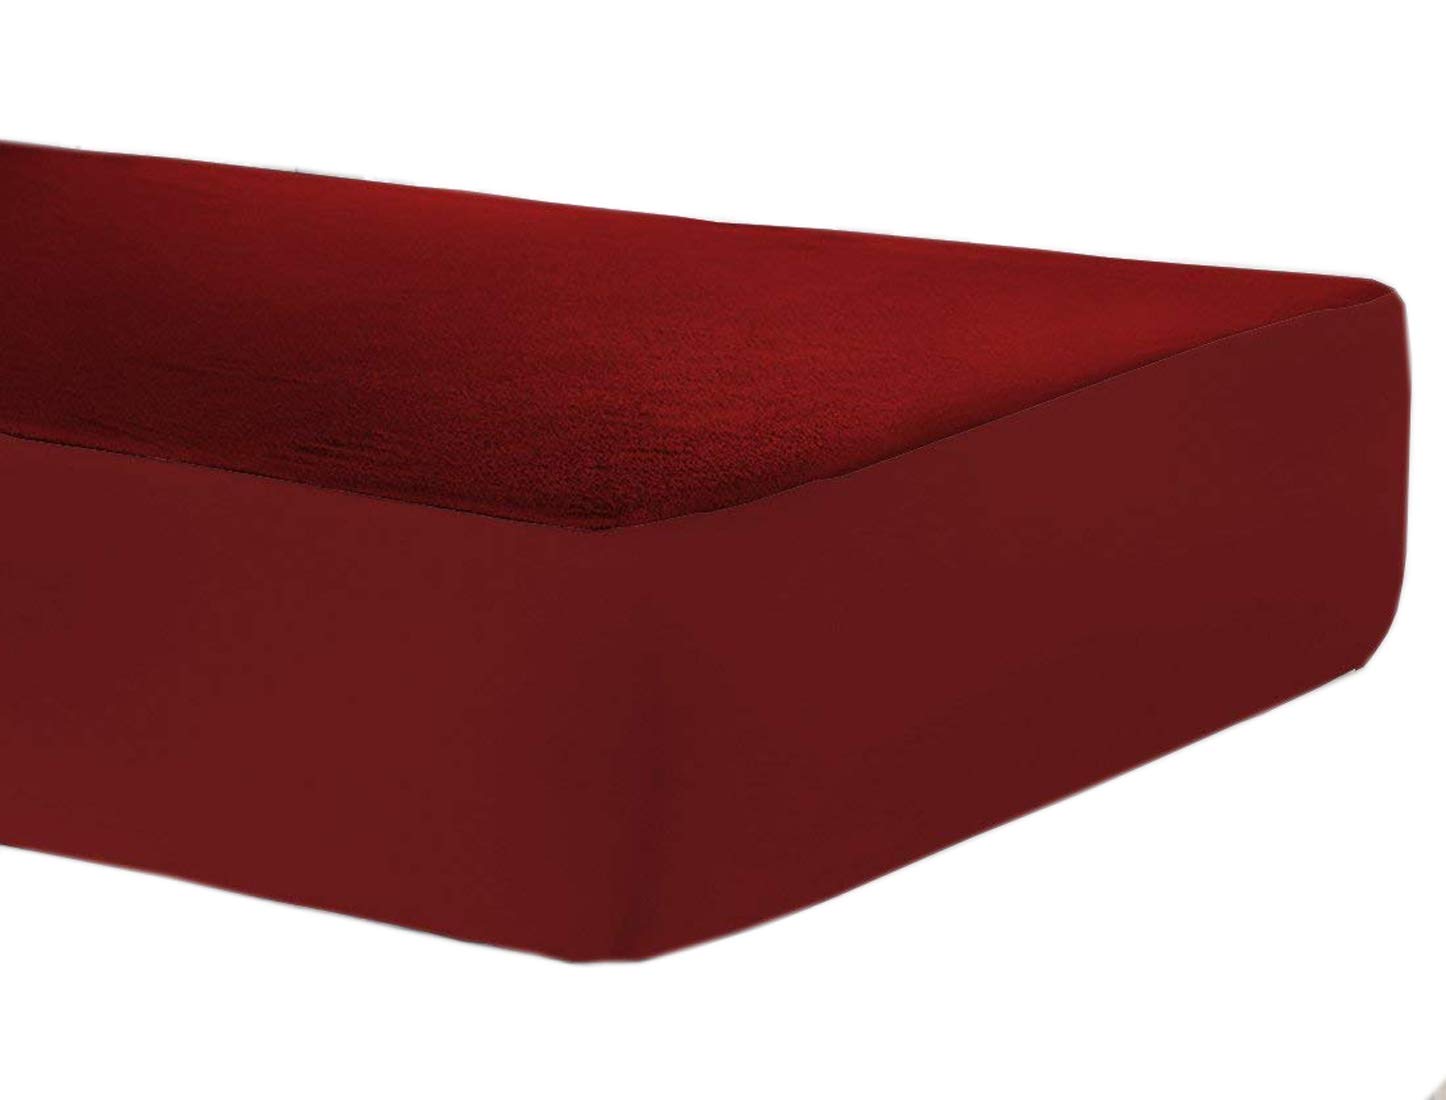 100% Waterproof Terry Cotton Fitted Mattress Protector for King Size Bed (78 x 72 Inch, Maroon) 4